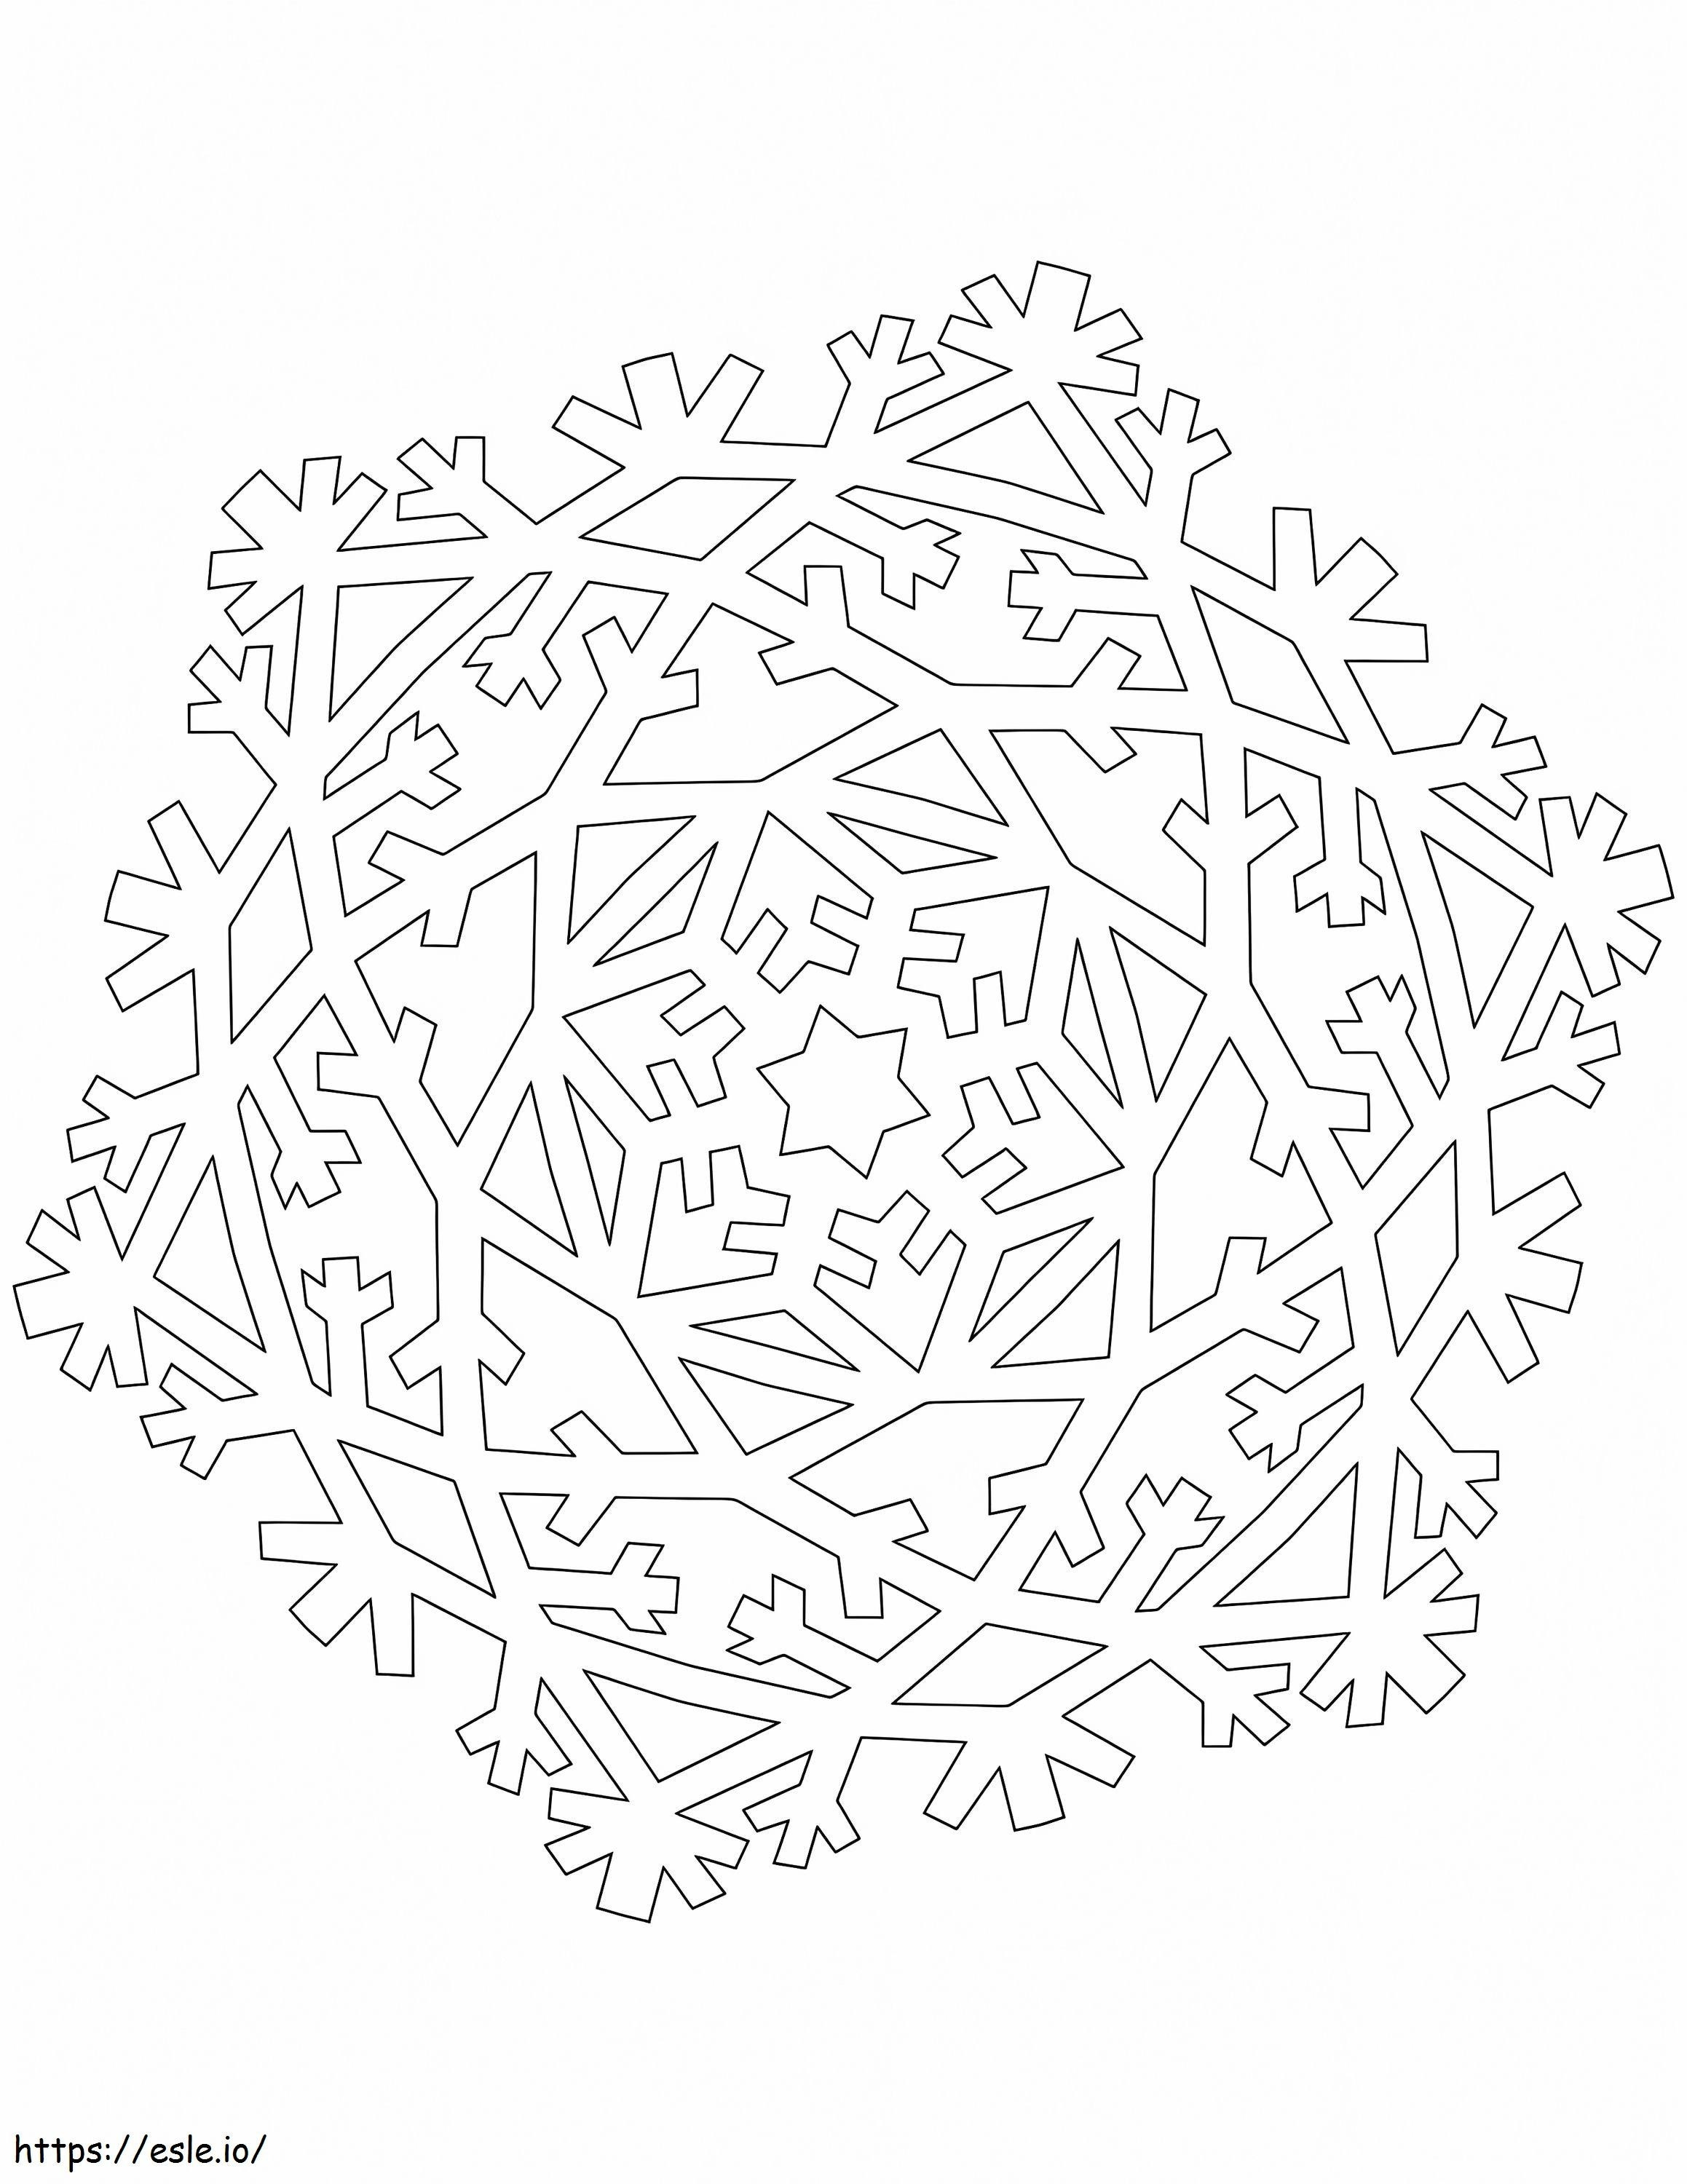 1590113668 Snowflake With Many Crystals coloring page